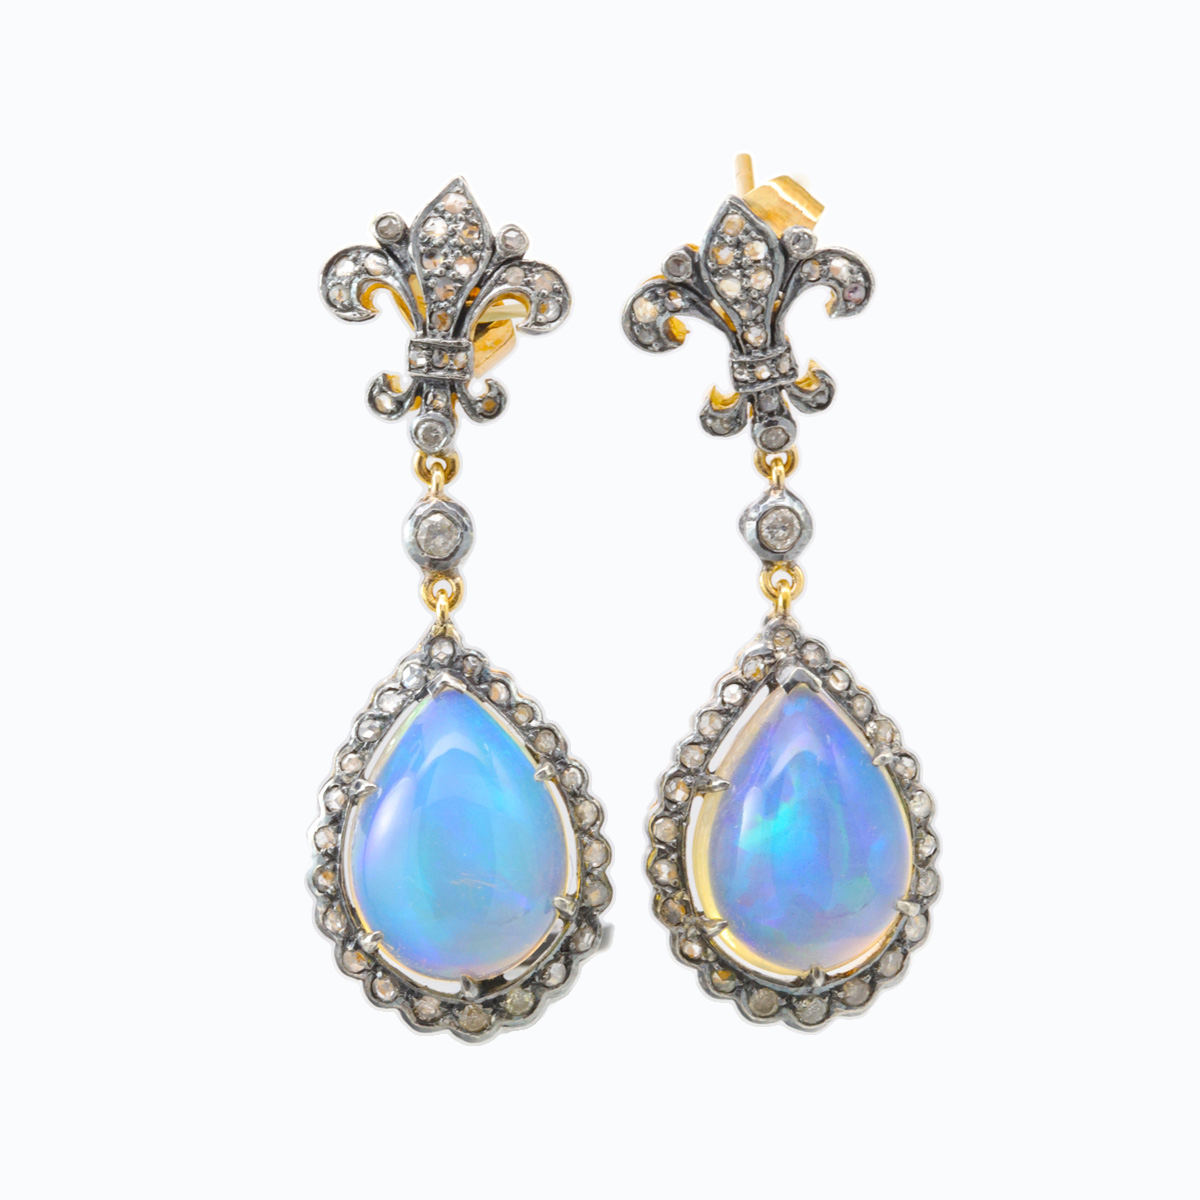 Vintage Moonstone Tear Drop Earrings with Diamond Accents